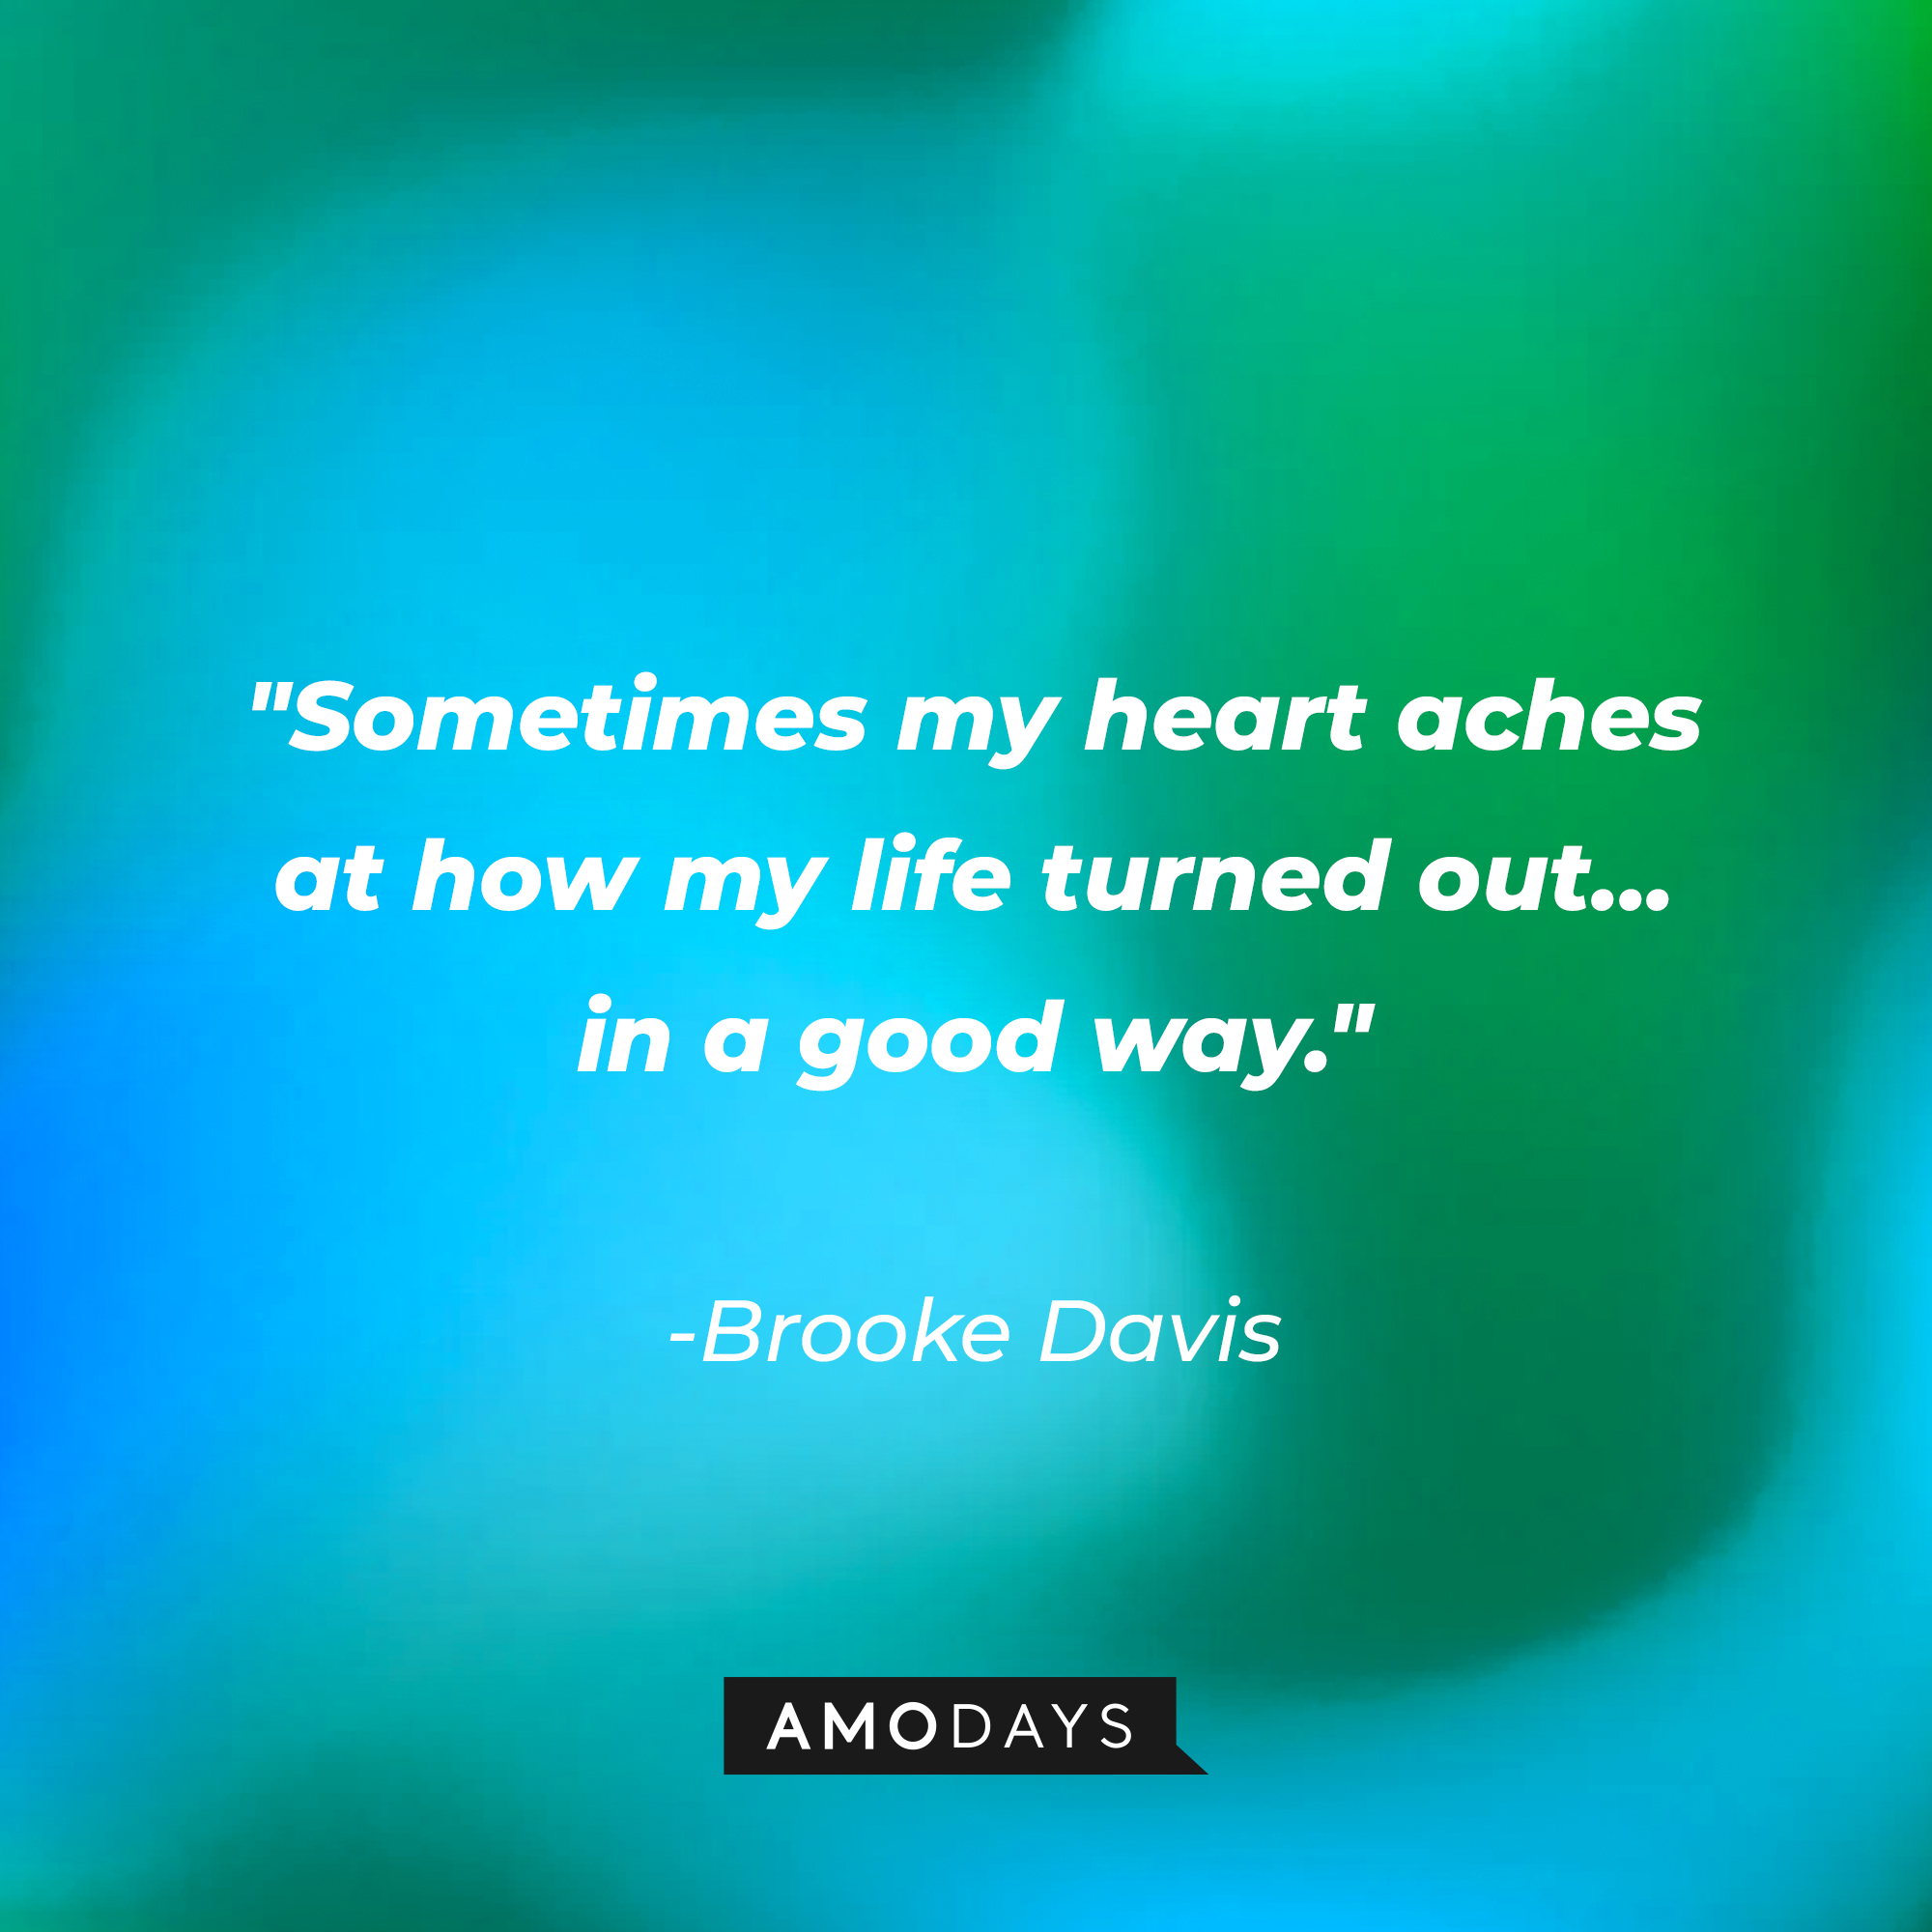 Brooke Davis' quote: "Sometimes my heart aches at how my life turned out... in a good way." | Source: AmoDays